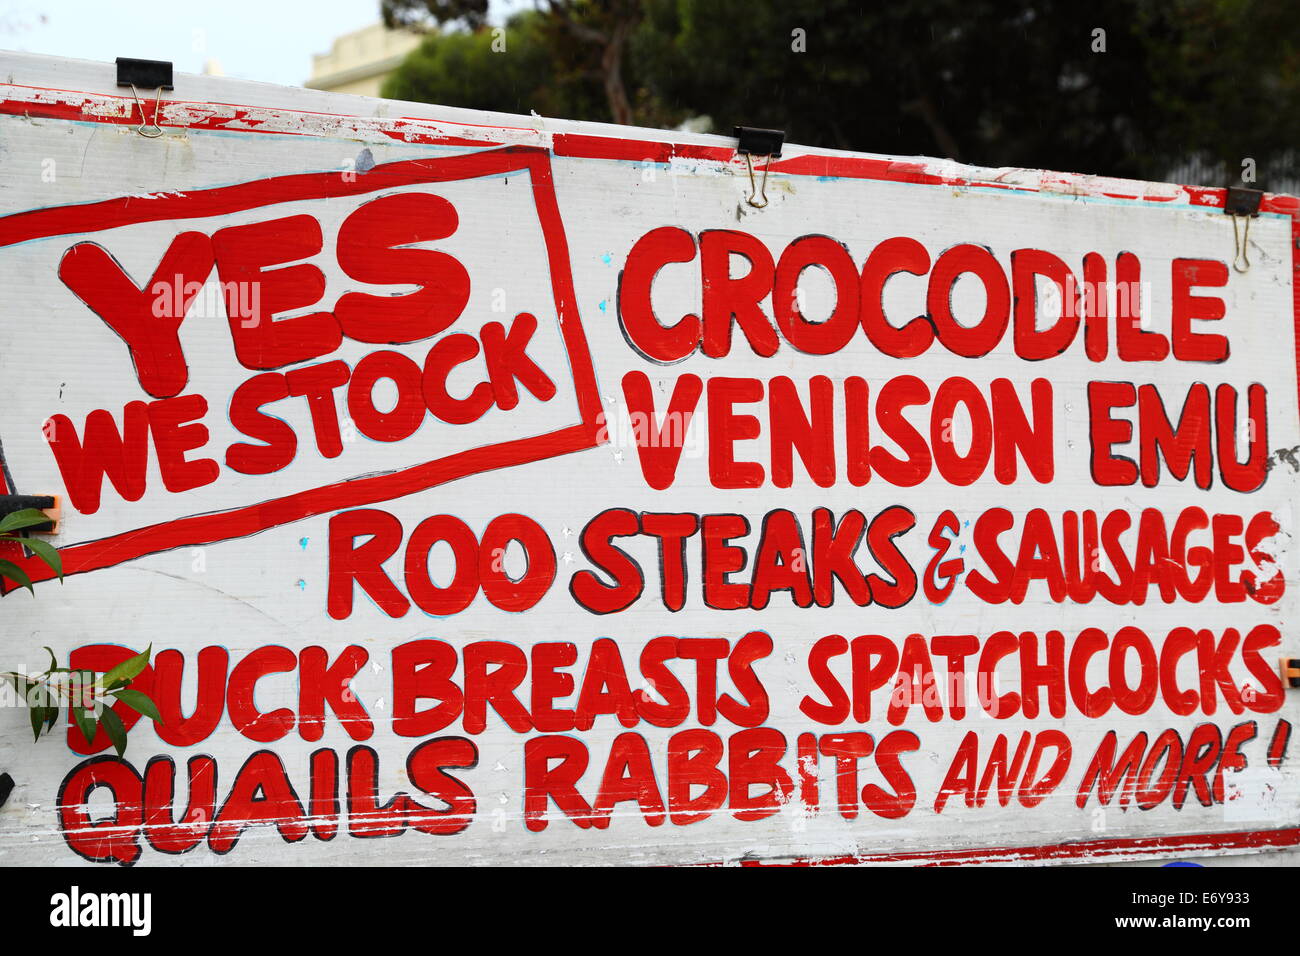 A sign out front of a butcher shop advertises the availability of crocodile, venison, emu etc. in Fremantle, Western Australia. Stock Photo